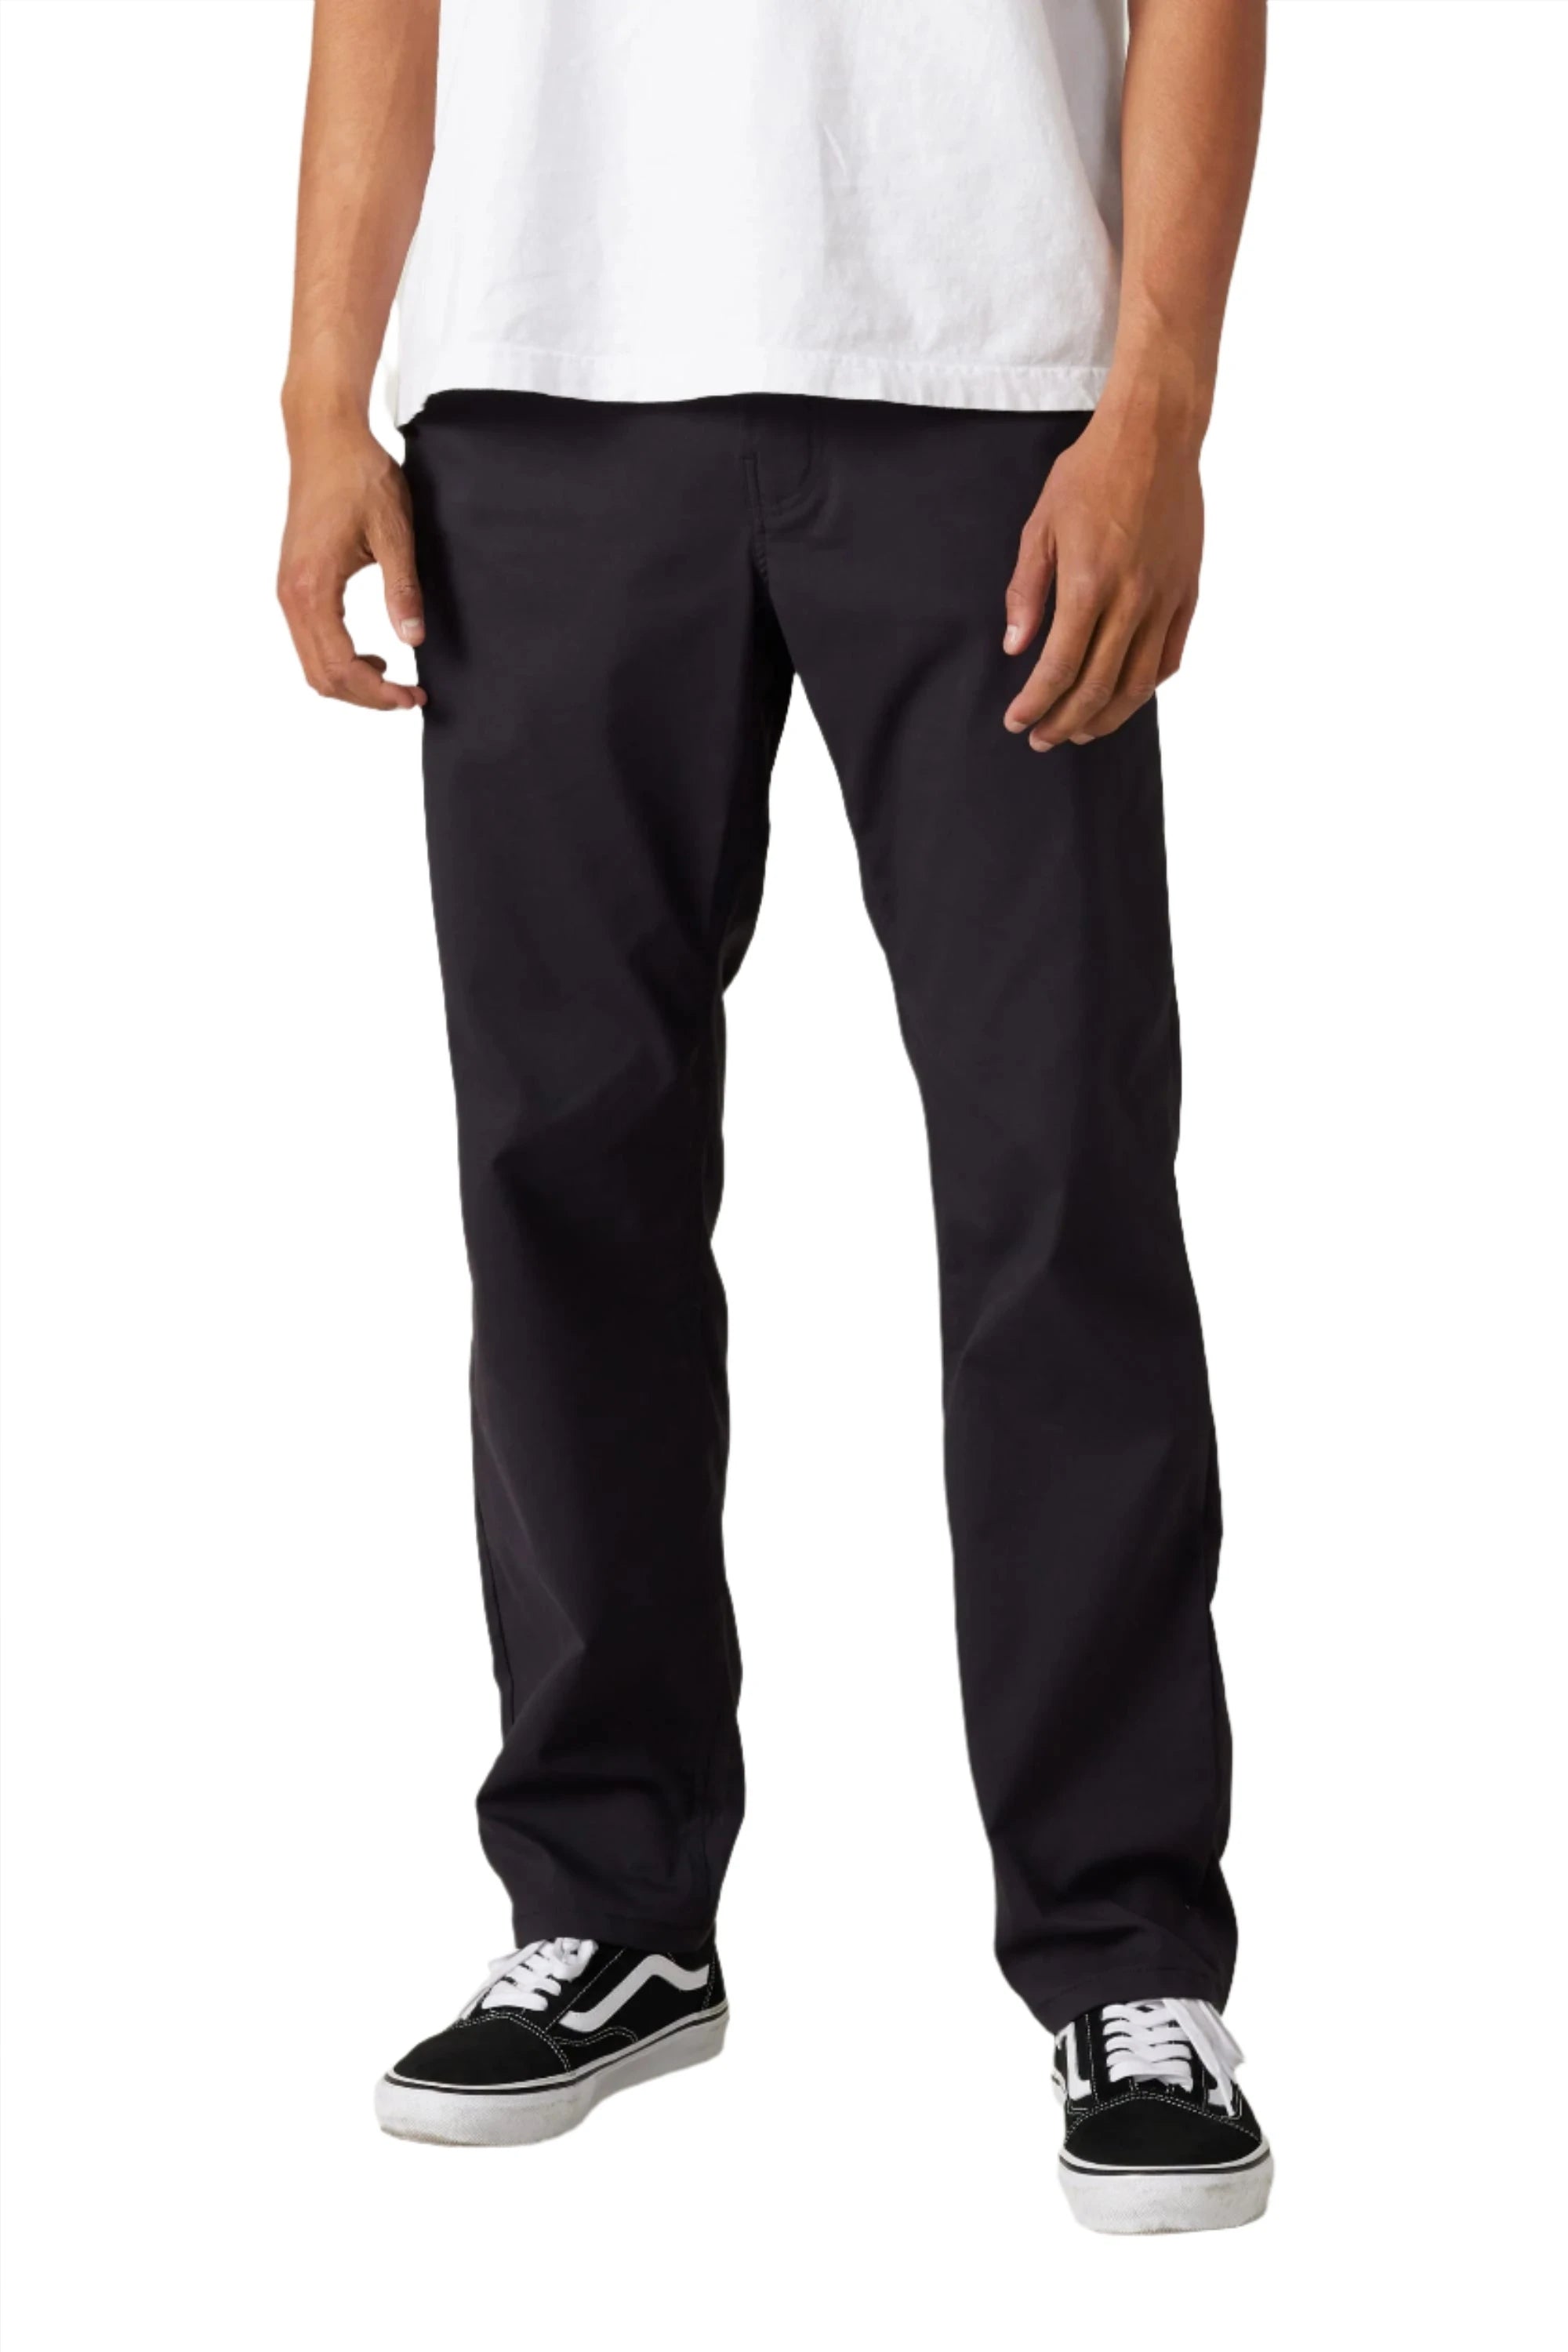 686 Everywhere Straight Fit Pants Black